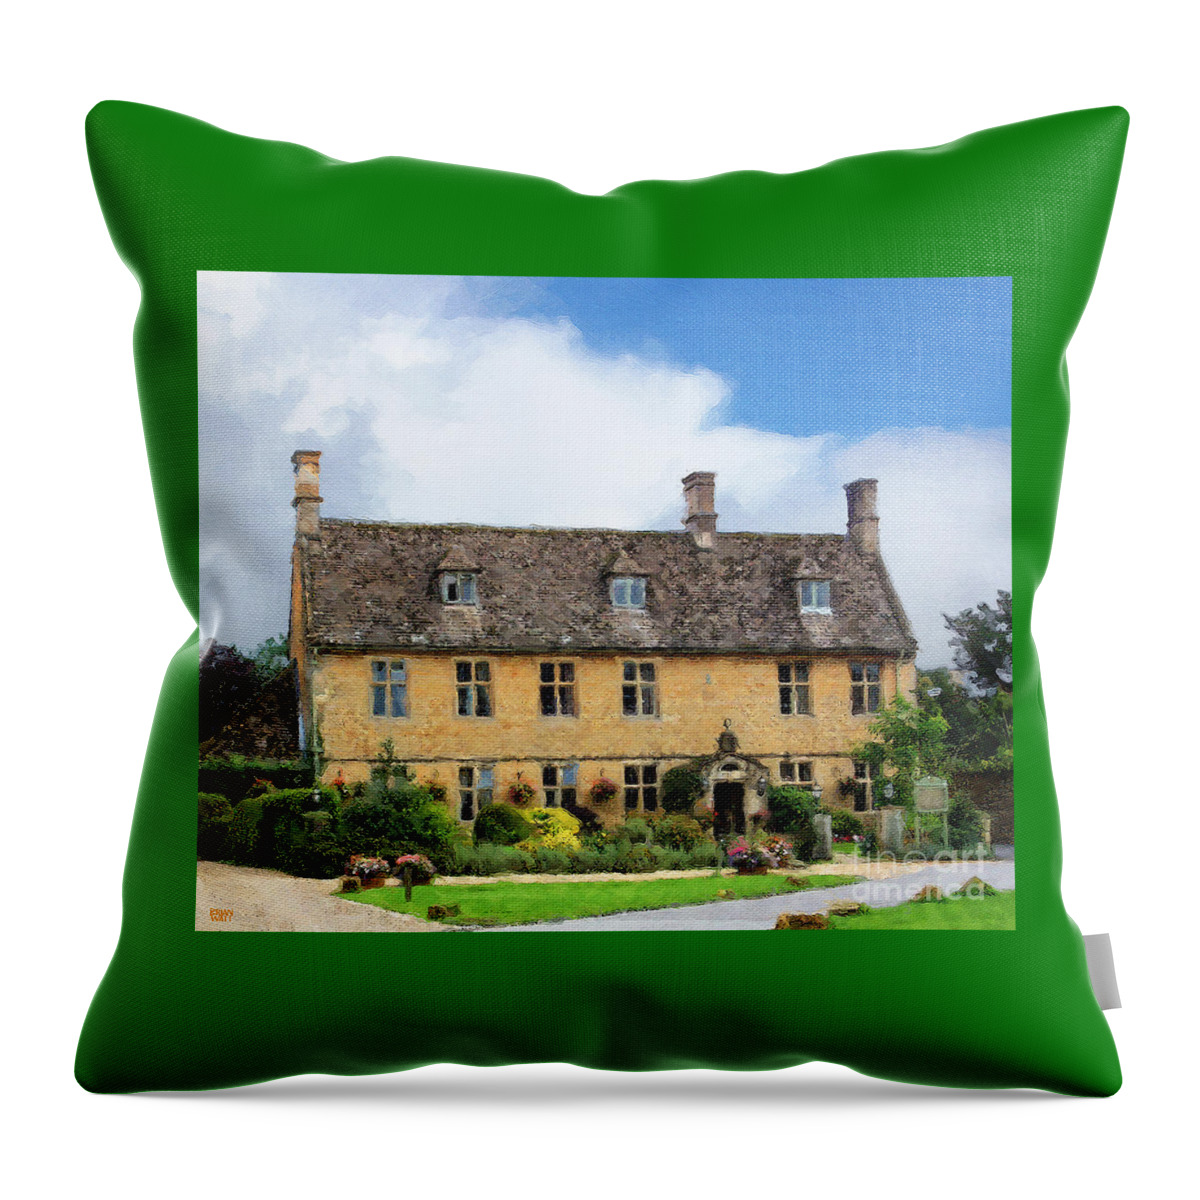 Bourton-on-the-water Throw Pillow featuring the photograph The Dial House in Bourton by Brian Watt